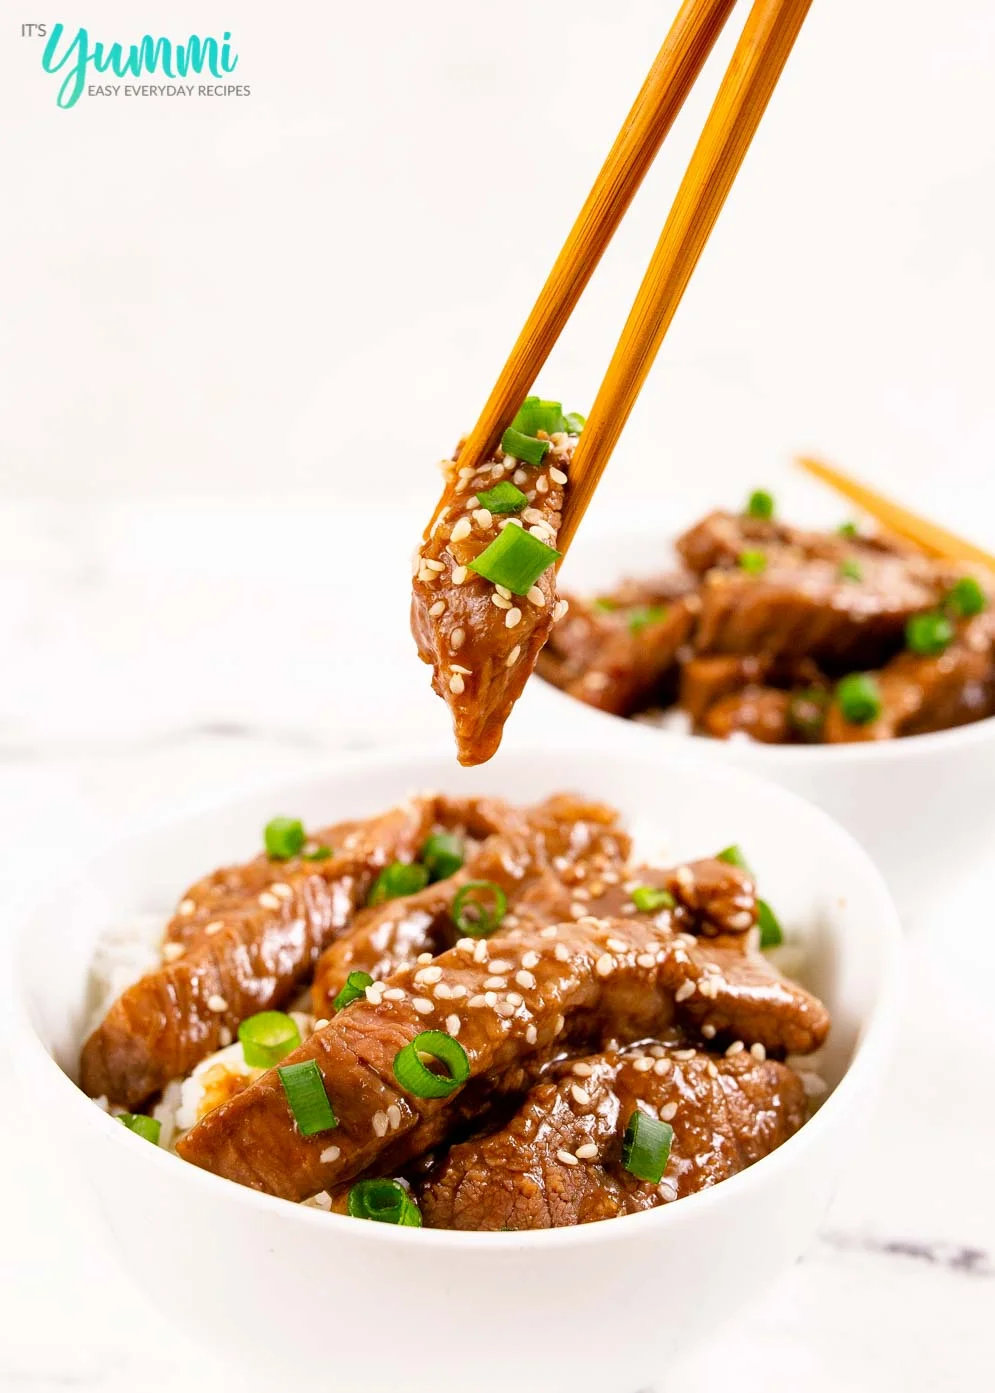 Chopsticks focus as they lift a piece of mongolian beef out of a bowl with whitebackground